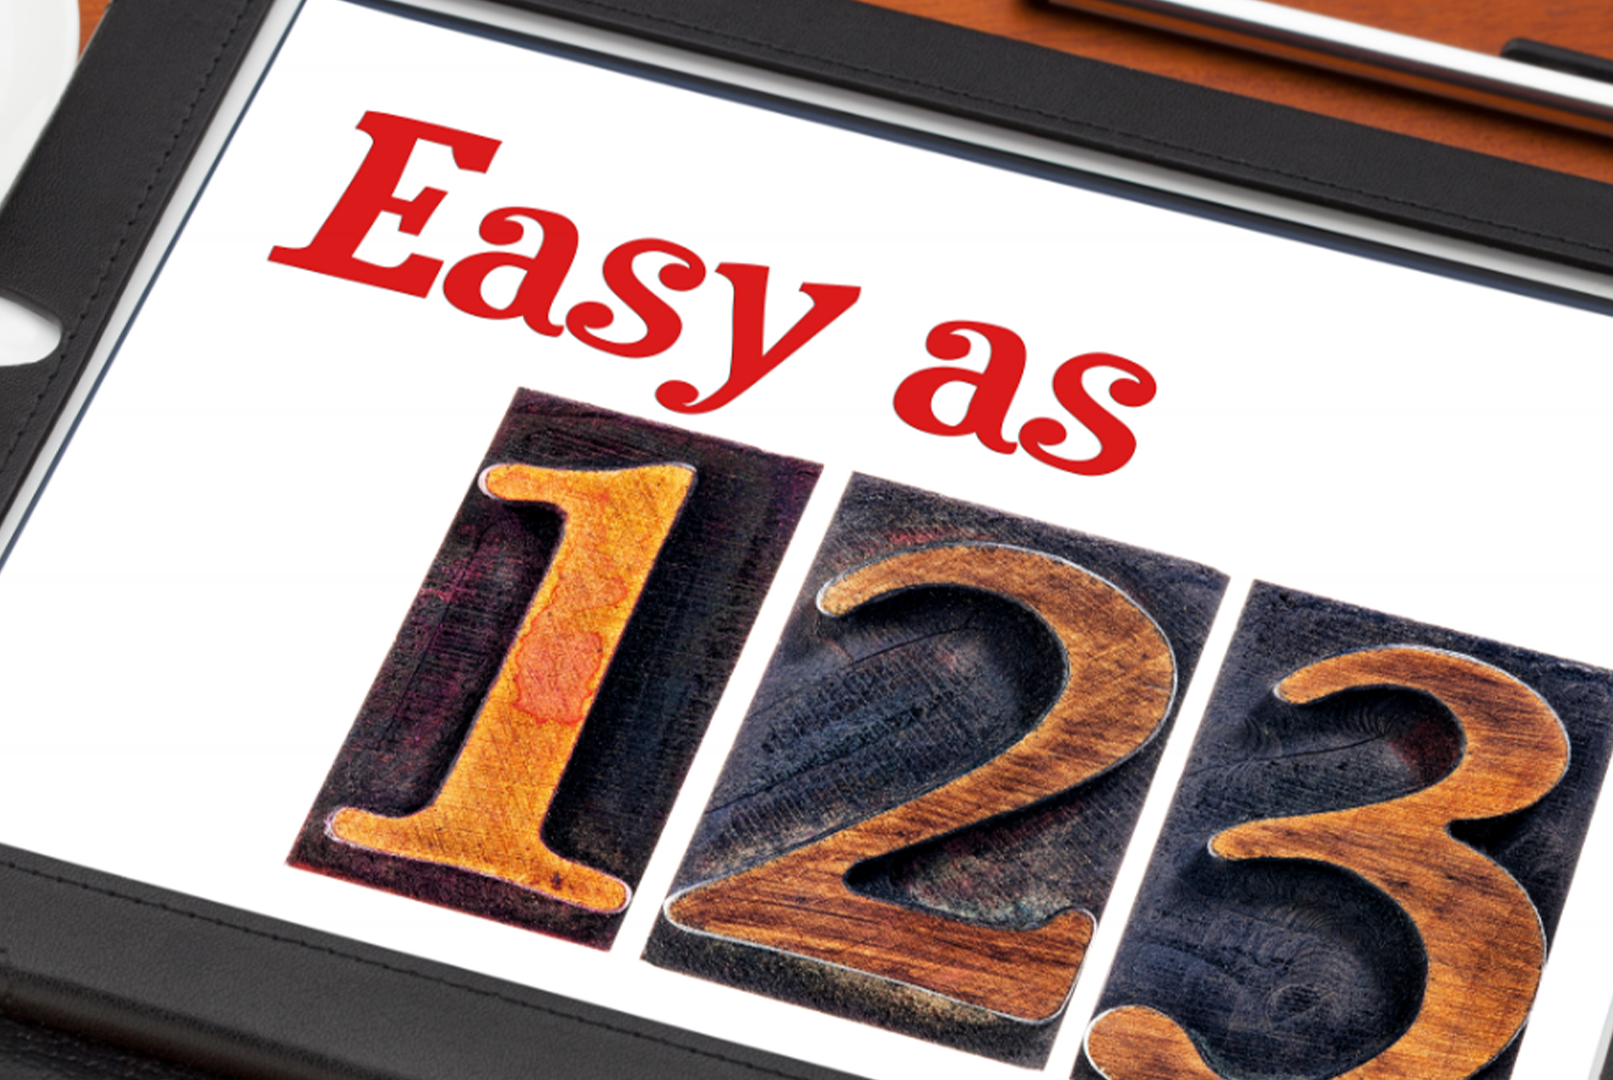 Blog-Easy-as 123 on a tablet